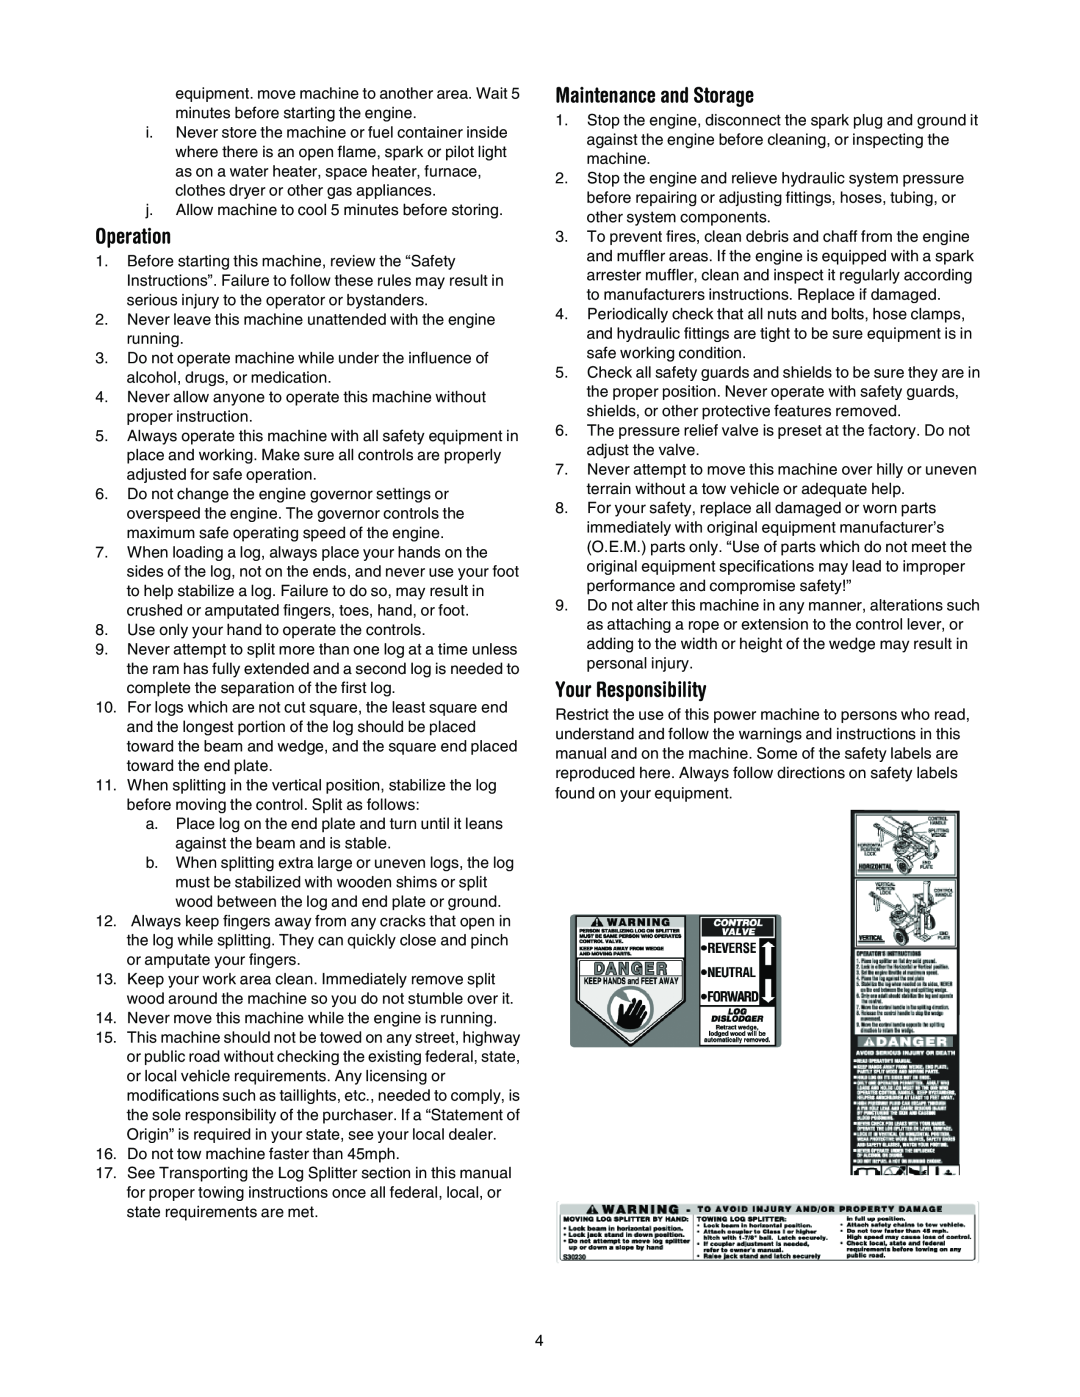 Troy-Bilt LS275 manual Operation, Maintenance and Storage, Your Responsibility 